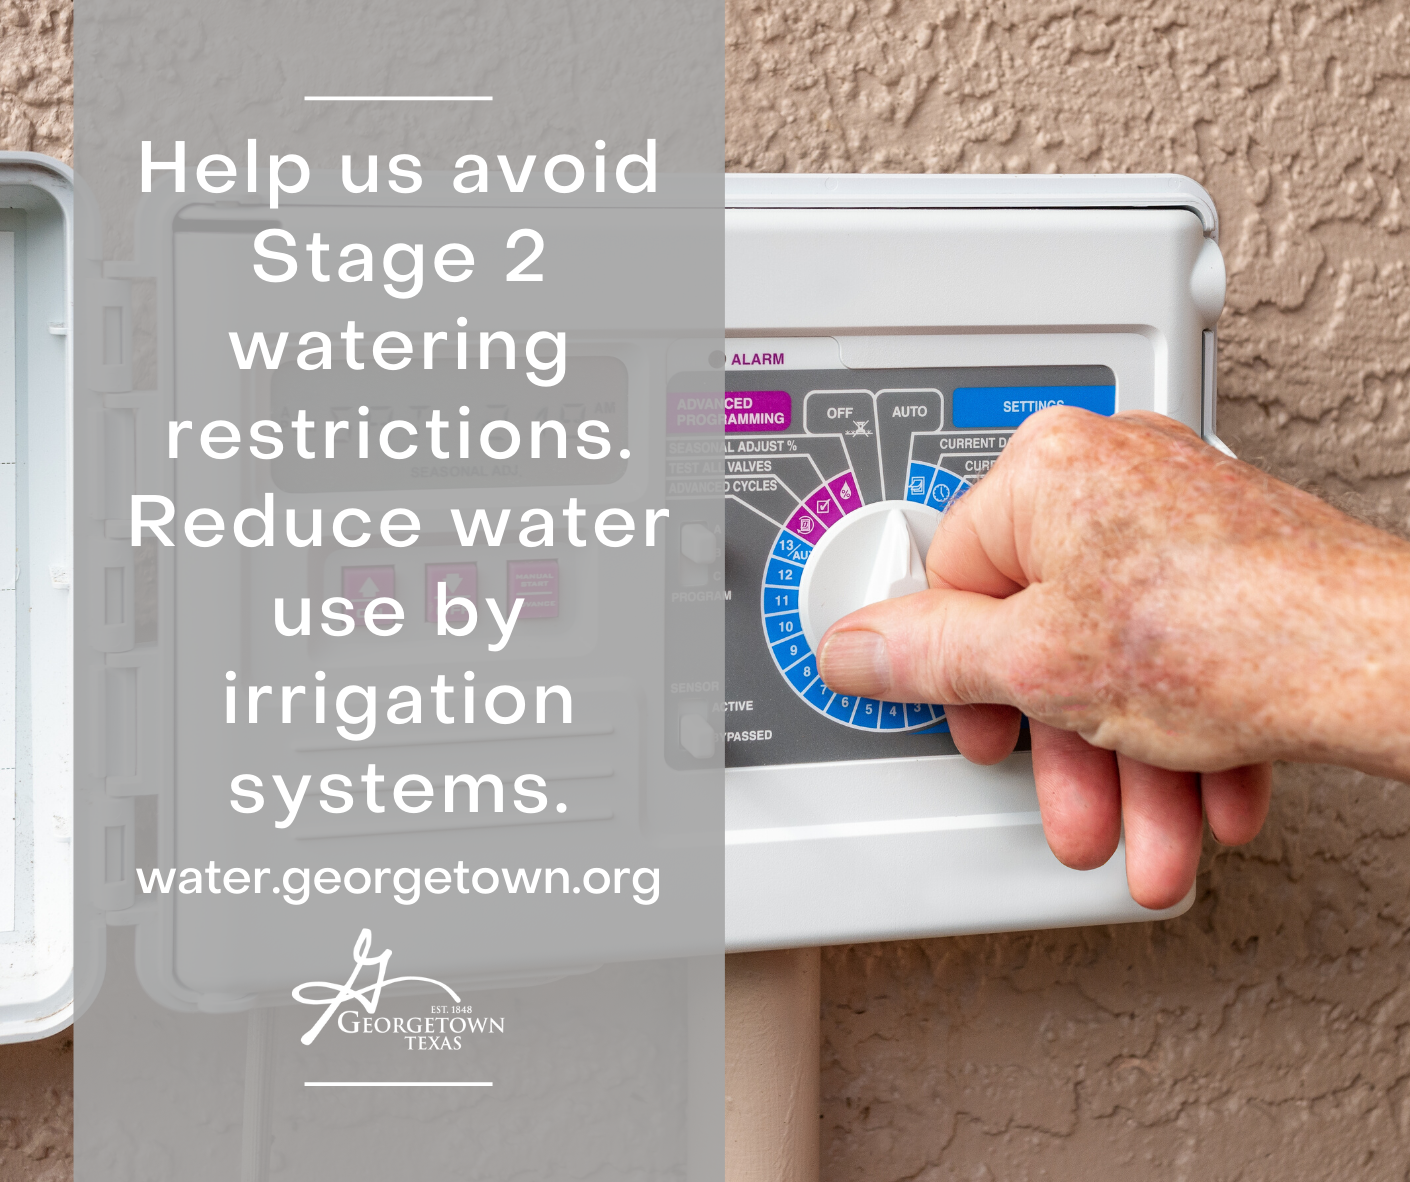 Help avoid Stage 2 watering restrictions, reduce water use by